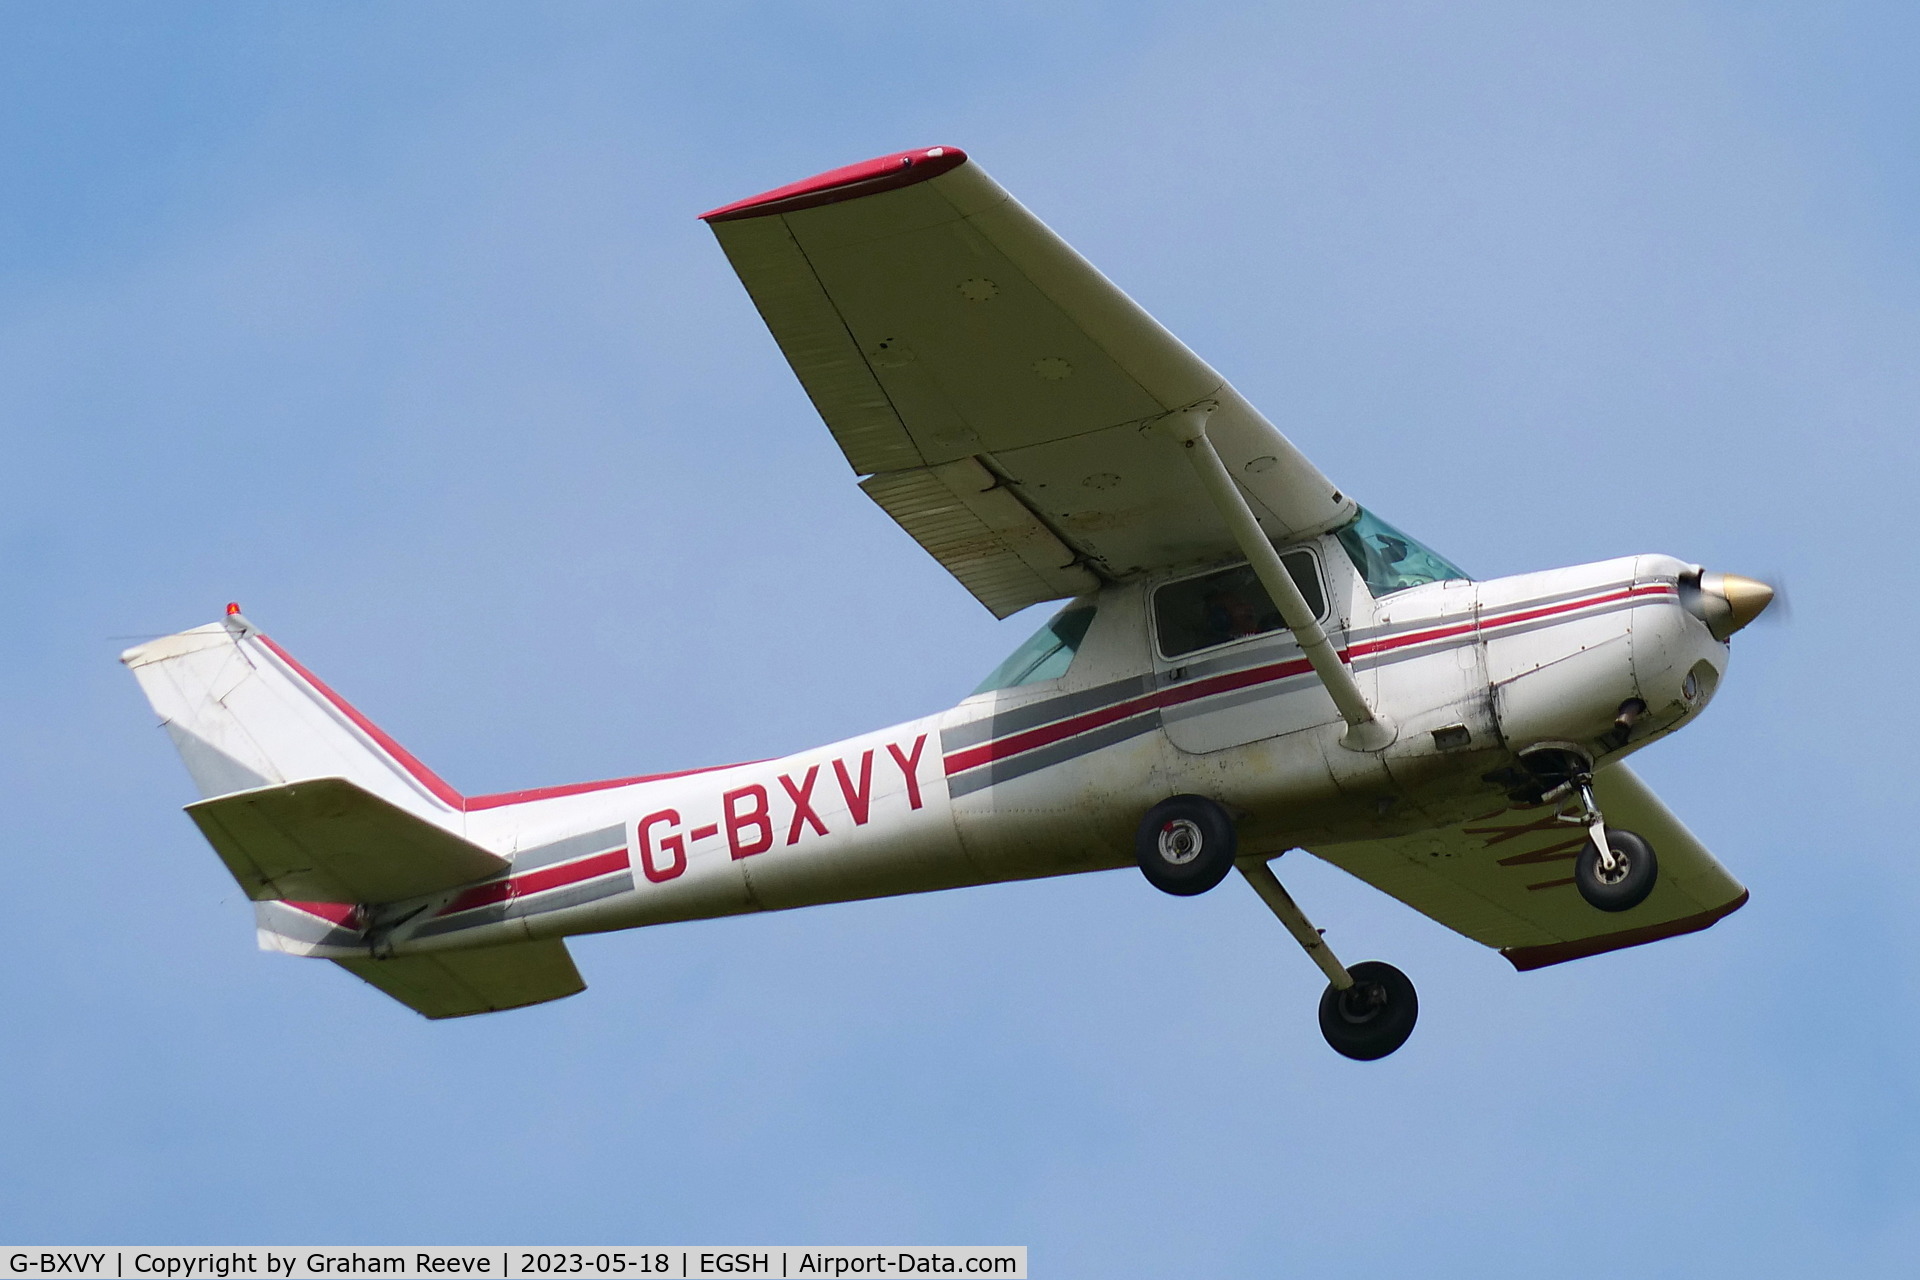 G-BXVY, 1979 Cessna 152 C/N 152-79808, Departing from Norwich.